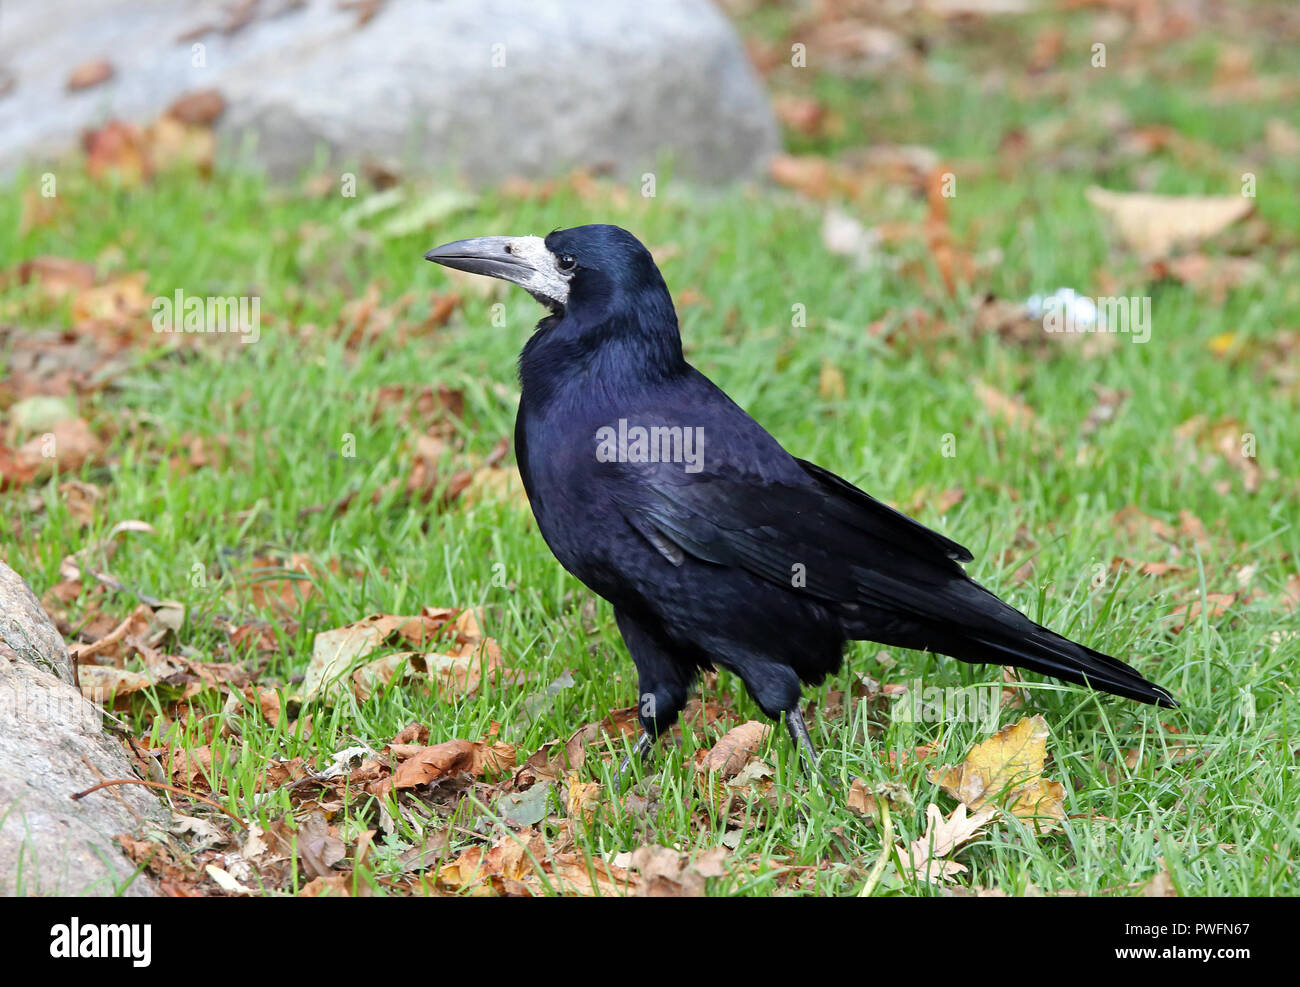 Rook (Corvus frugilegus) standing on grass in sunlight with glossy feathers and eye contact Stock Photo